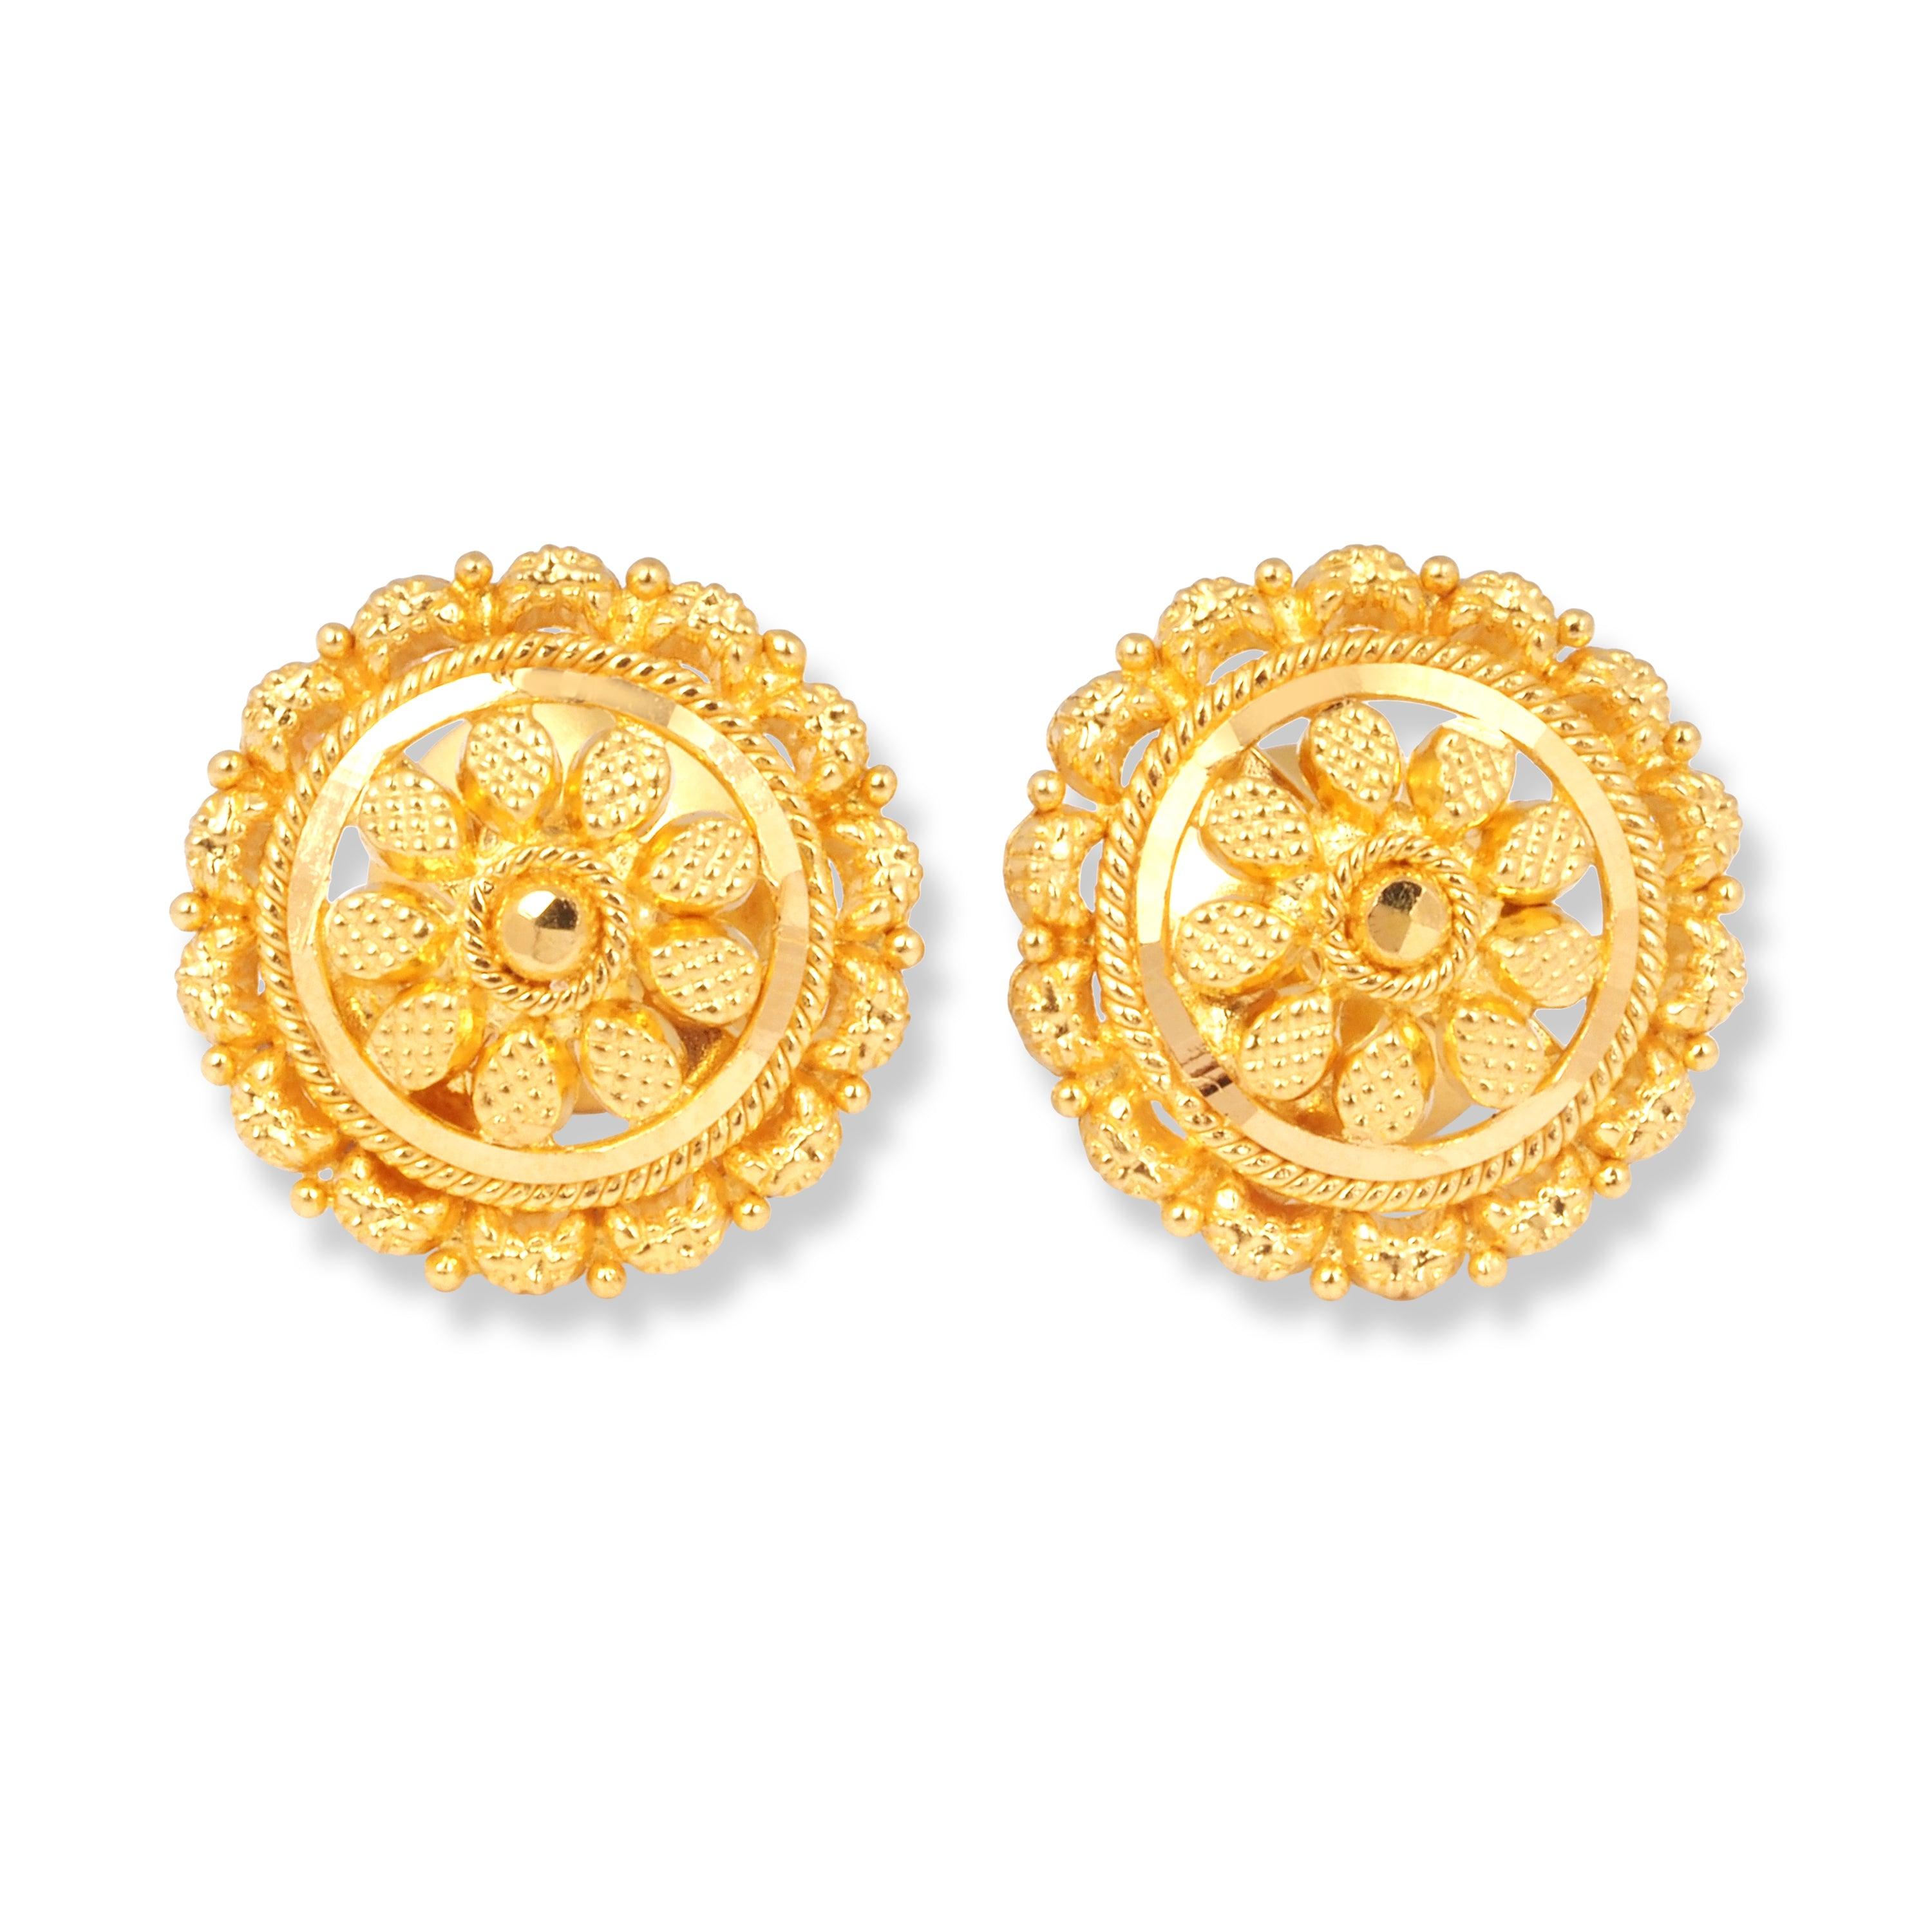 22ct Gold Earrings with Filigree Design (3.7g) E-7883 - Minar Jewellers